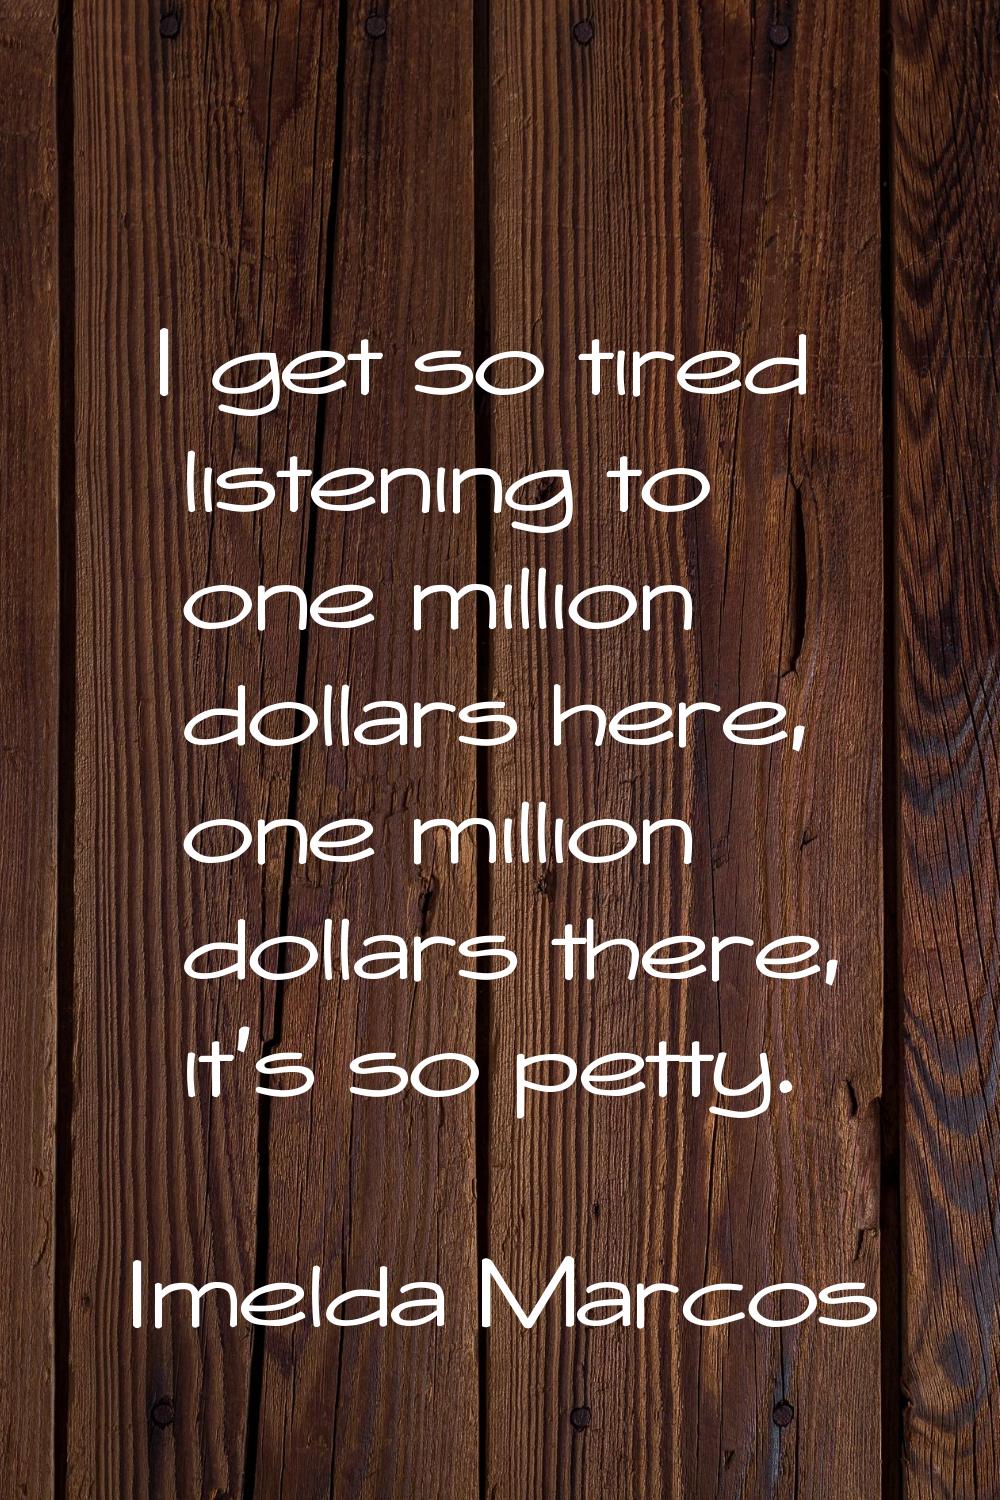 I get so tired listening to one million dollars here, one million dollars there, it's so petty.